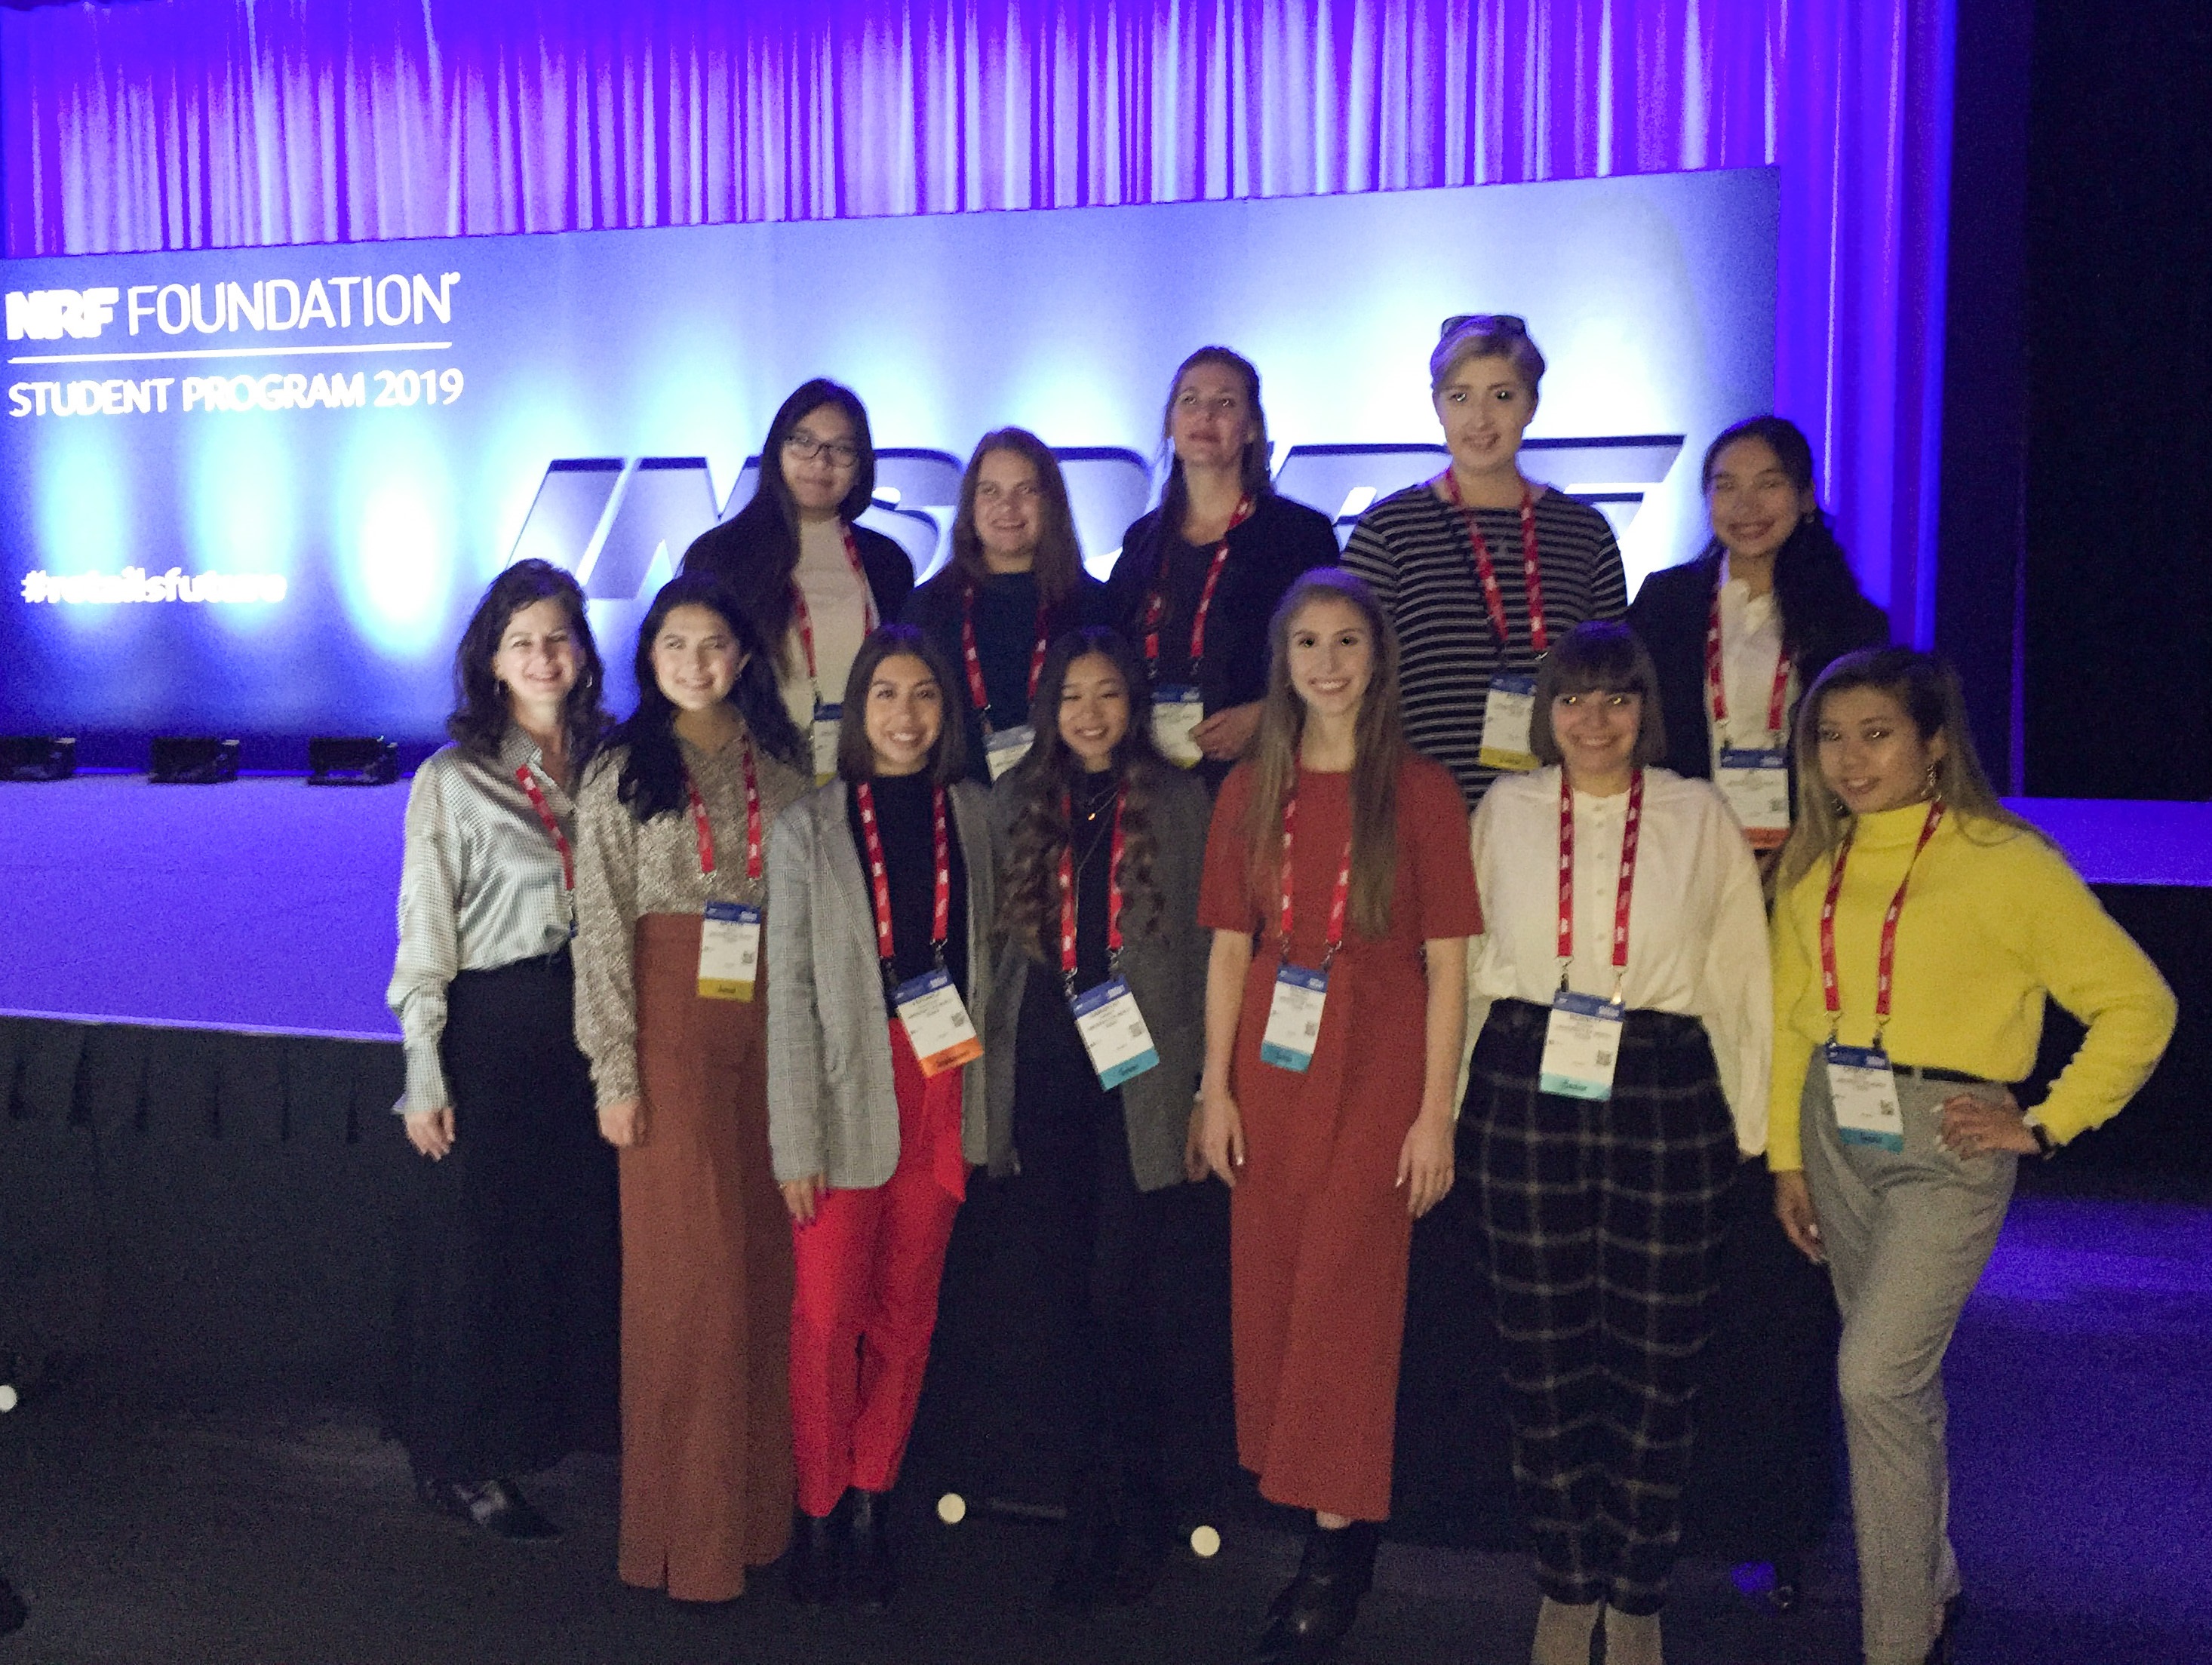 Linda Mihalick attends NRF with 12 University of North Texas students